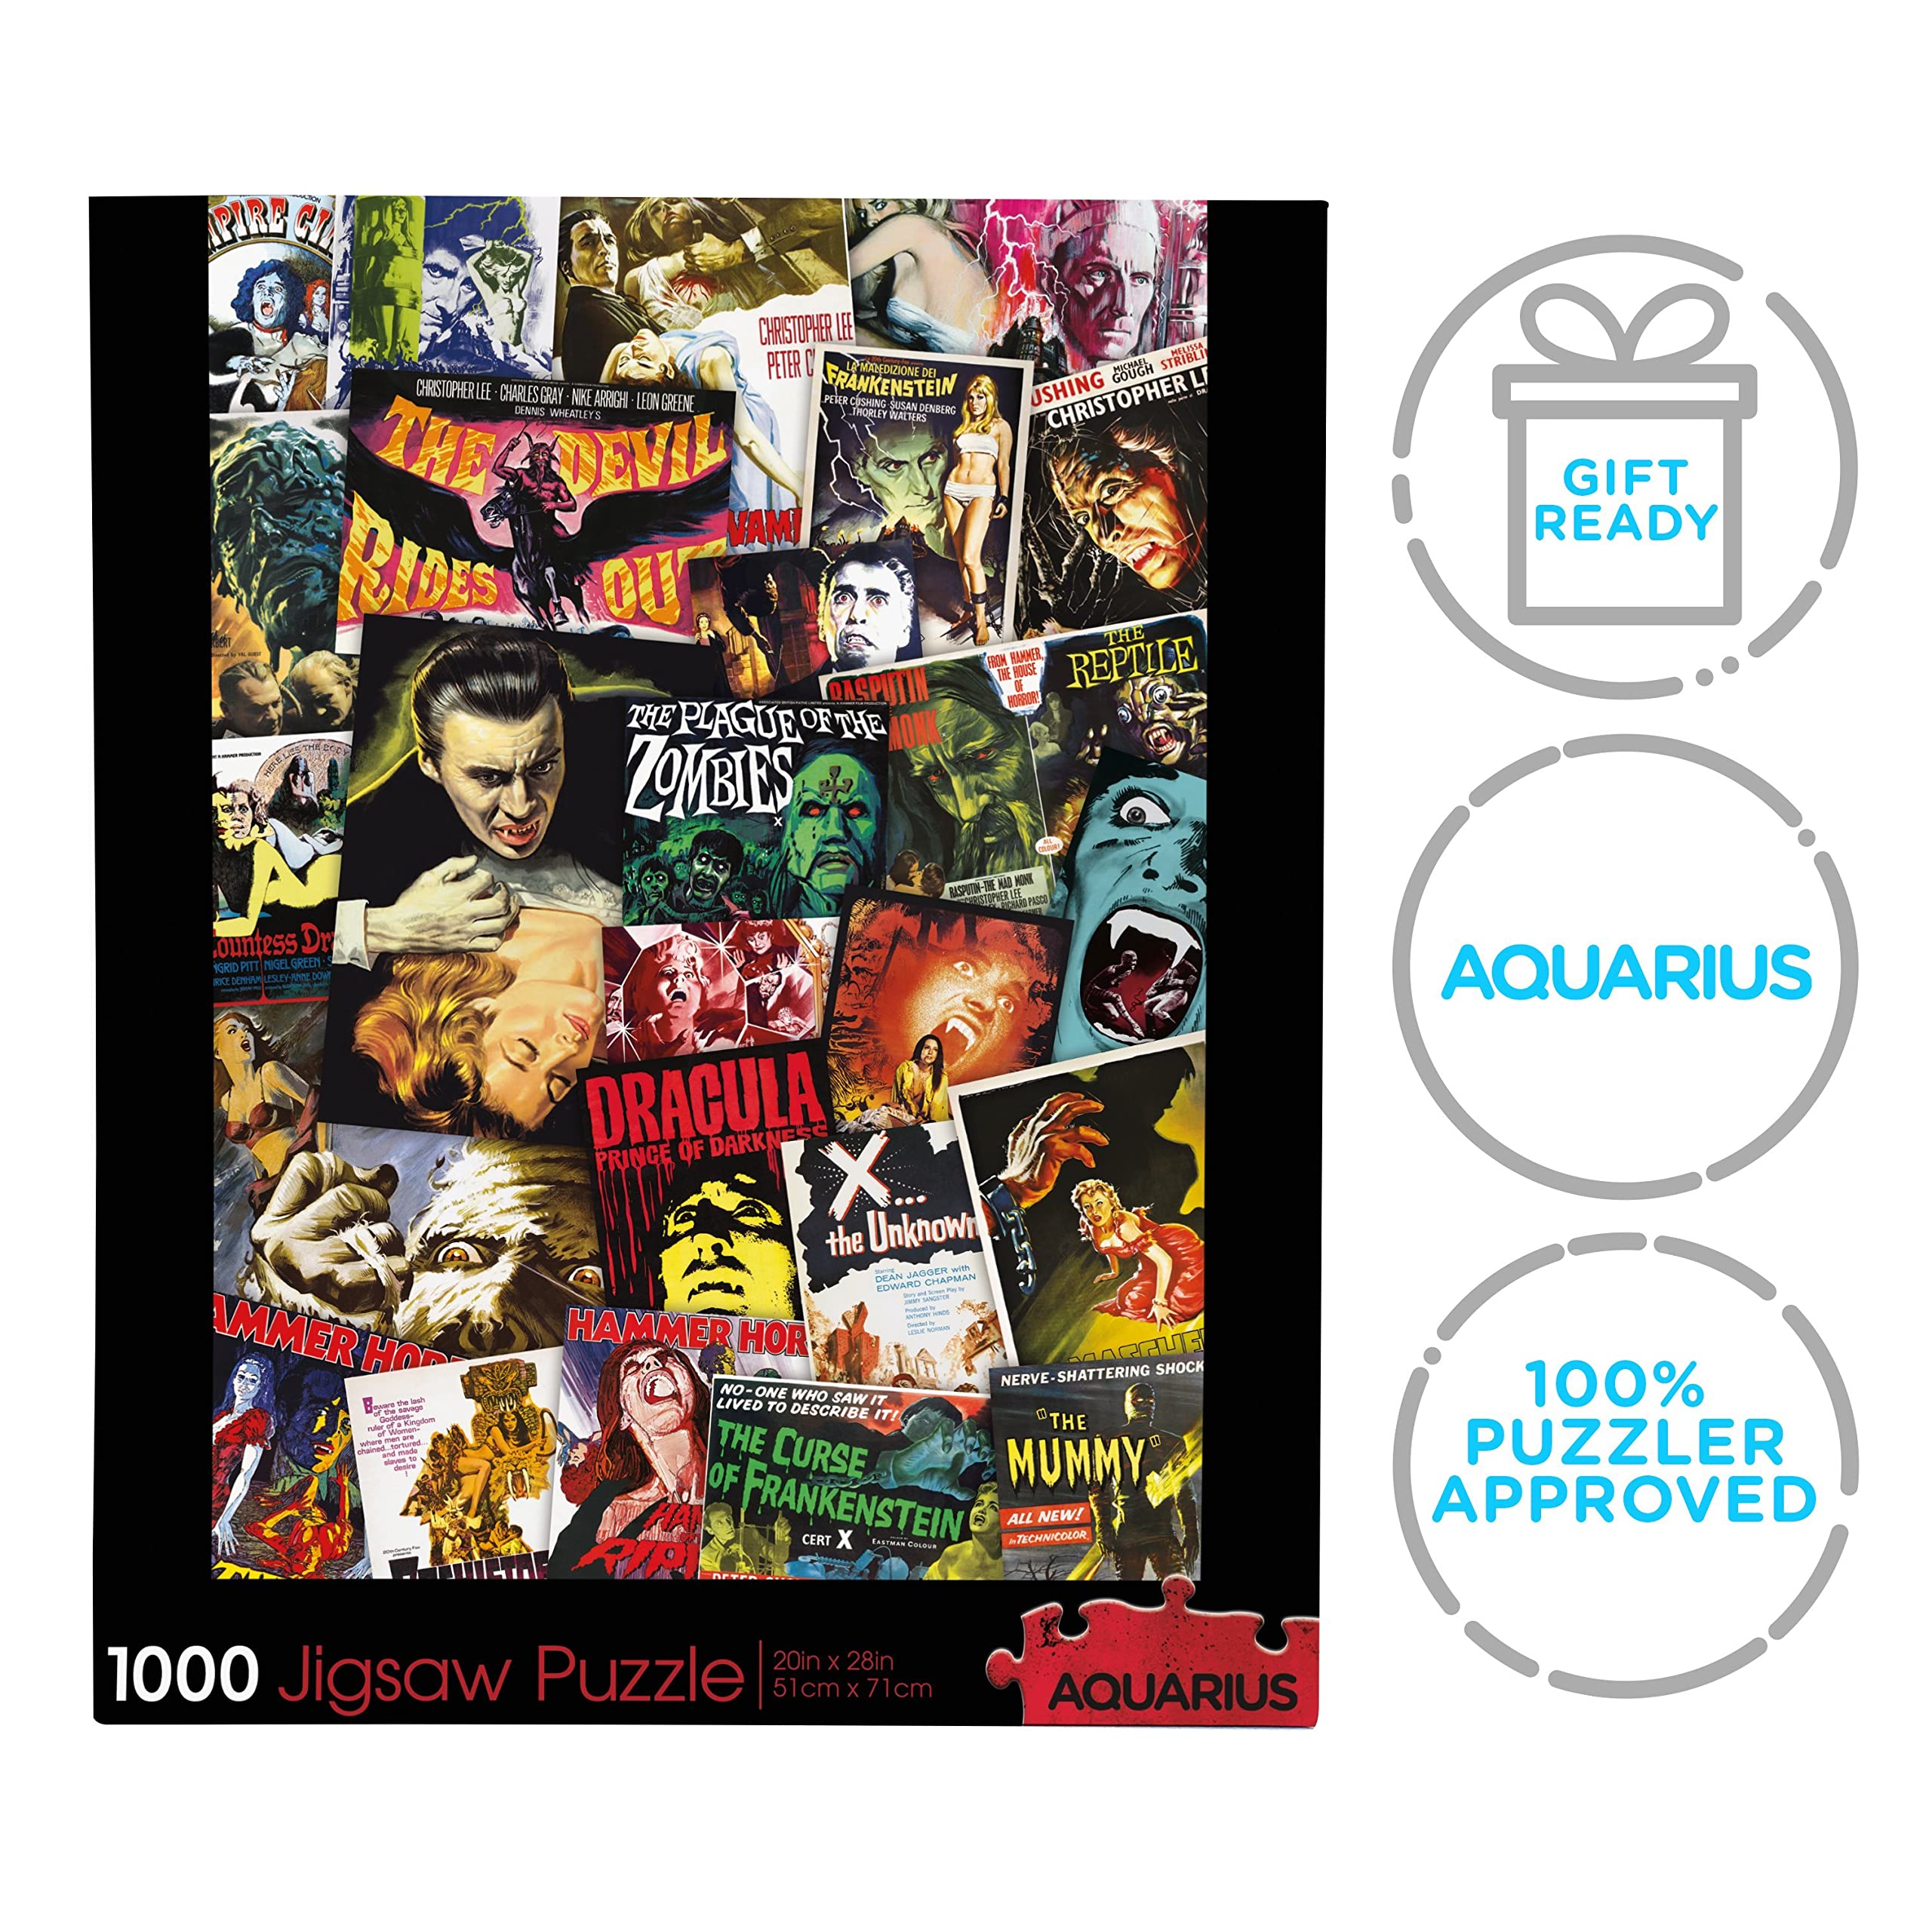 AQUARIUS Hammer Classic Horror Movies Collage (1000 Piece Jigsaw Puzzle) - Glare Free - Precision Fit - Officially Licensed Hammer Merchandise & Collectibles - 20x28 Inches